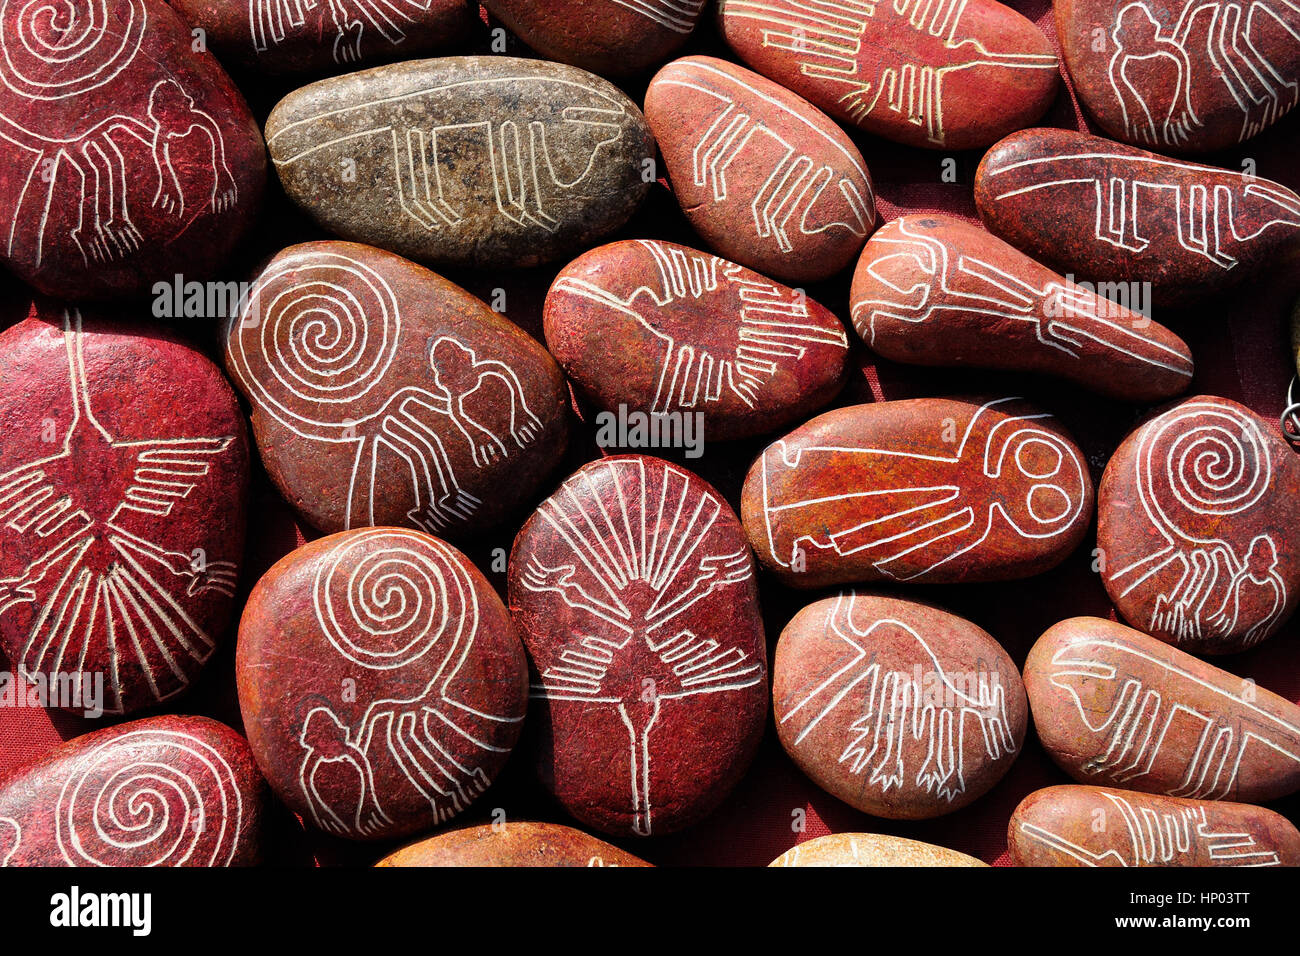 Southern America, Nazca Lines drawn on stones which are being sold in the tourist as souvenirs from Peru Stock Photo